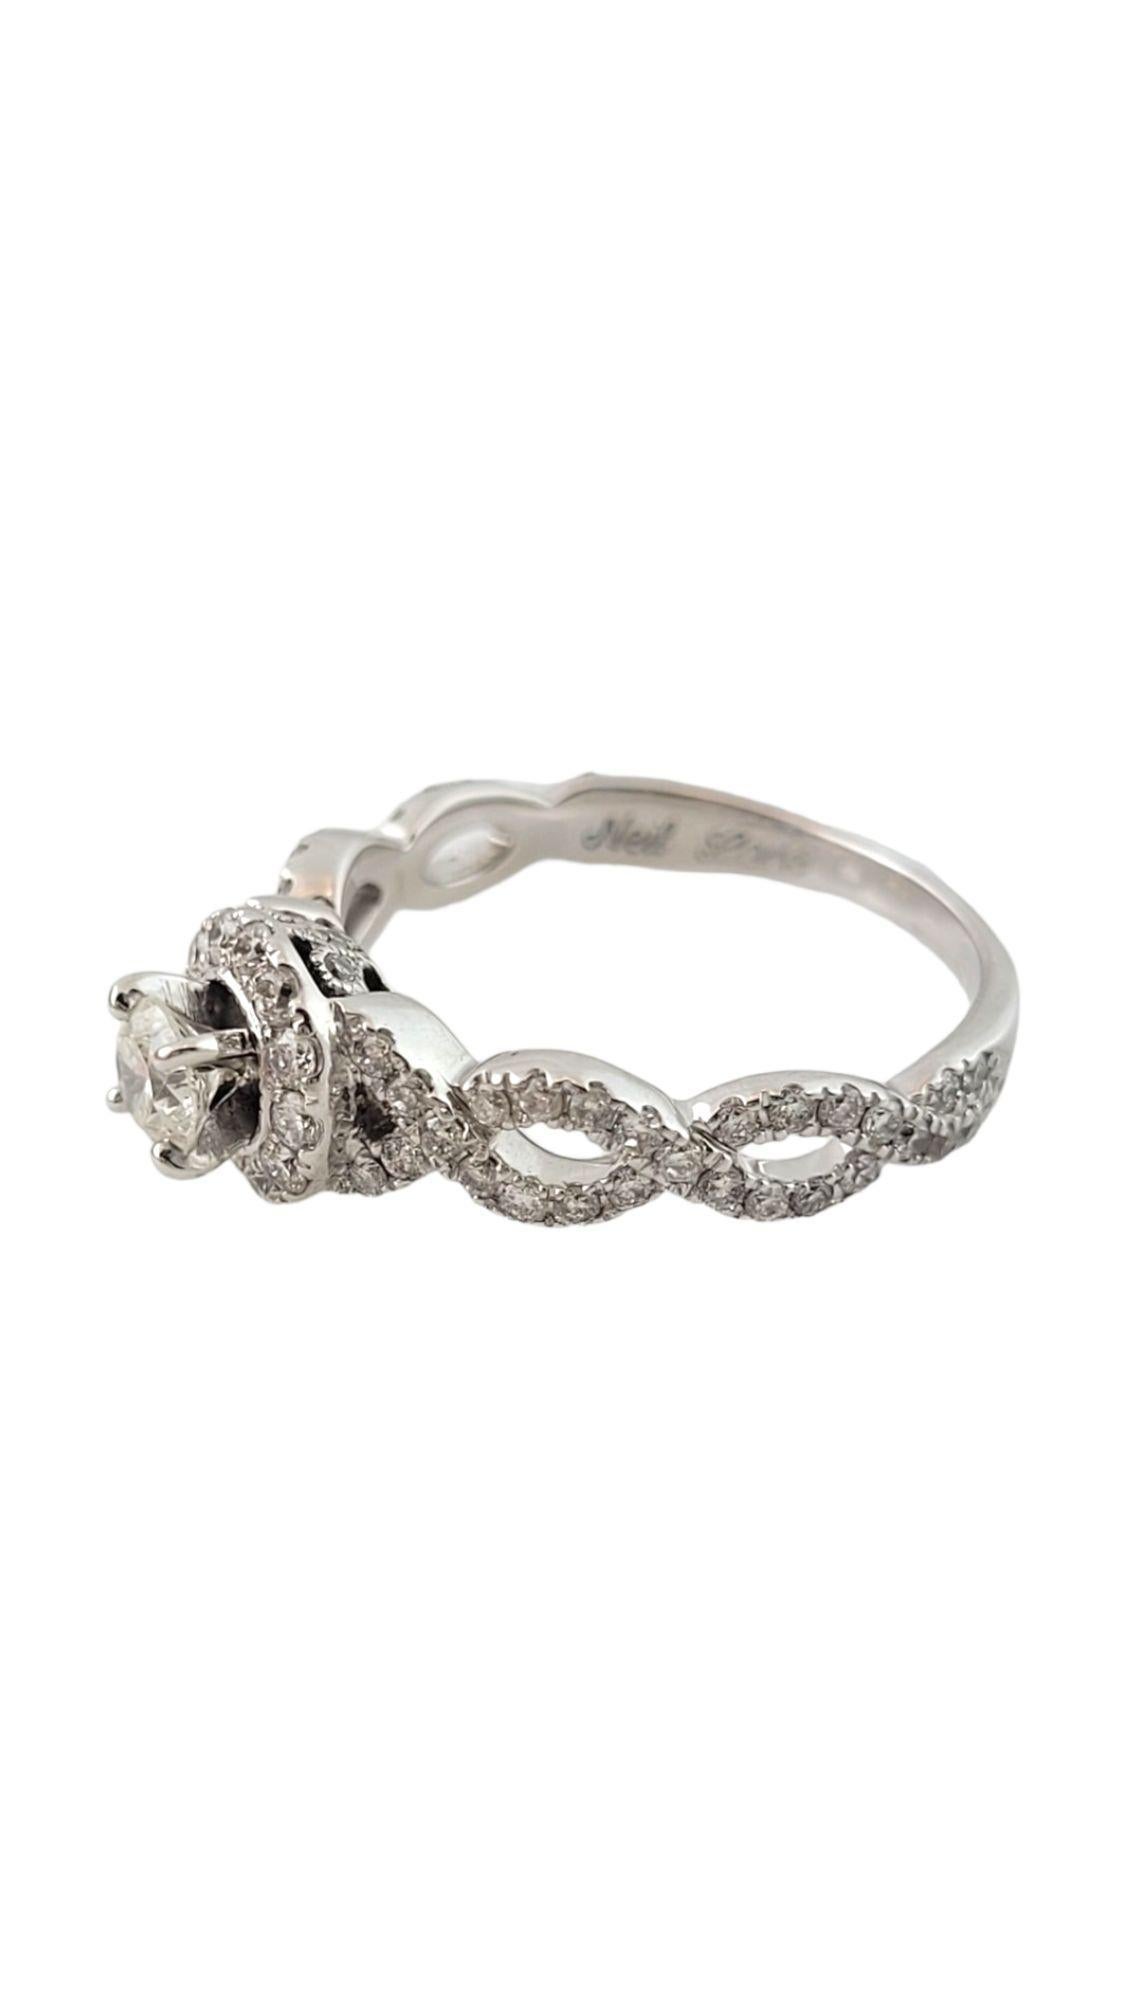 14K Neil Lane White Gold Diamond Ring Size 7.25

This gorgeous 14K white gold ring is decorated with 69 gorgeous, sparkling, round brilliant cut diamonds!

Approximate total diamond weight: 1.01 cts

Center diamond clarity: I1
Center diamond color: